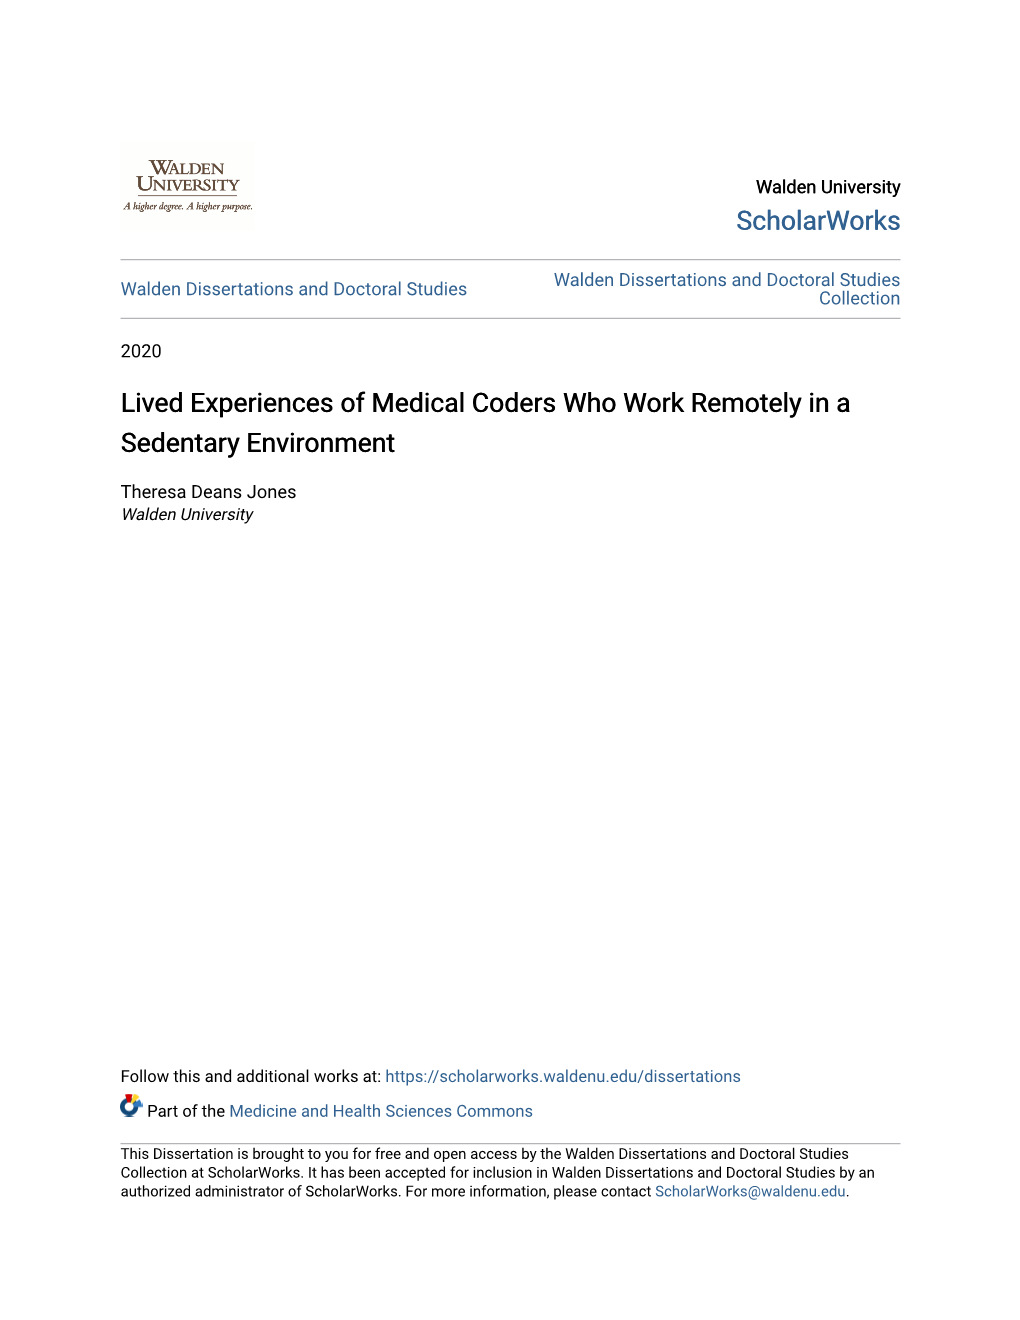 Lived Experiences of Medical Coders Who Work Remotely in a Sedentary Environment